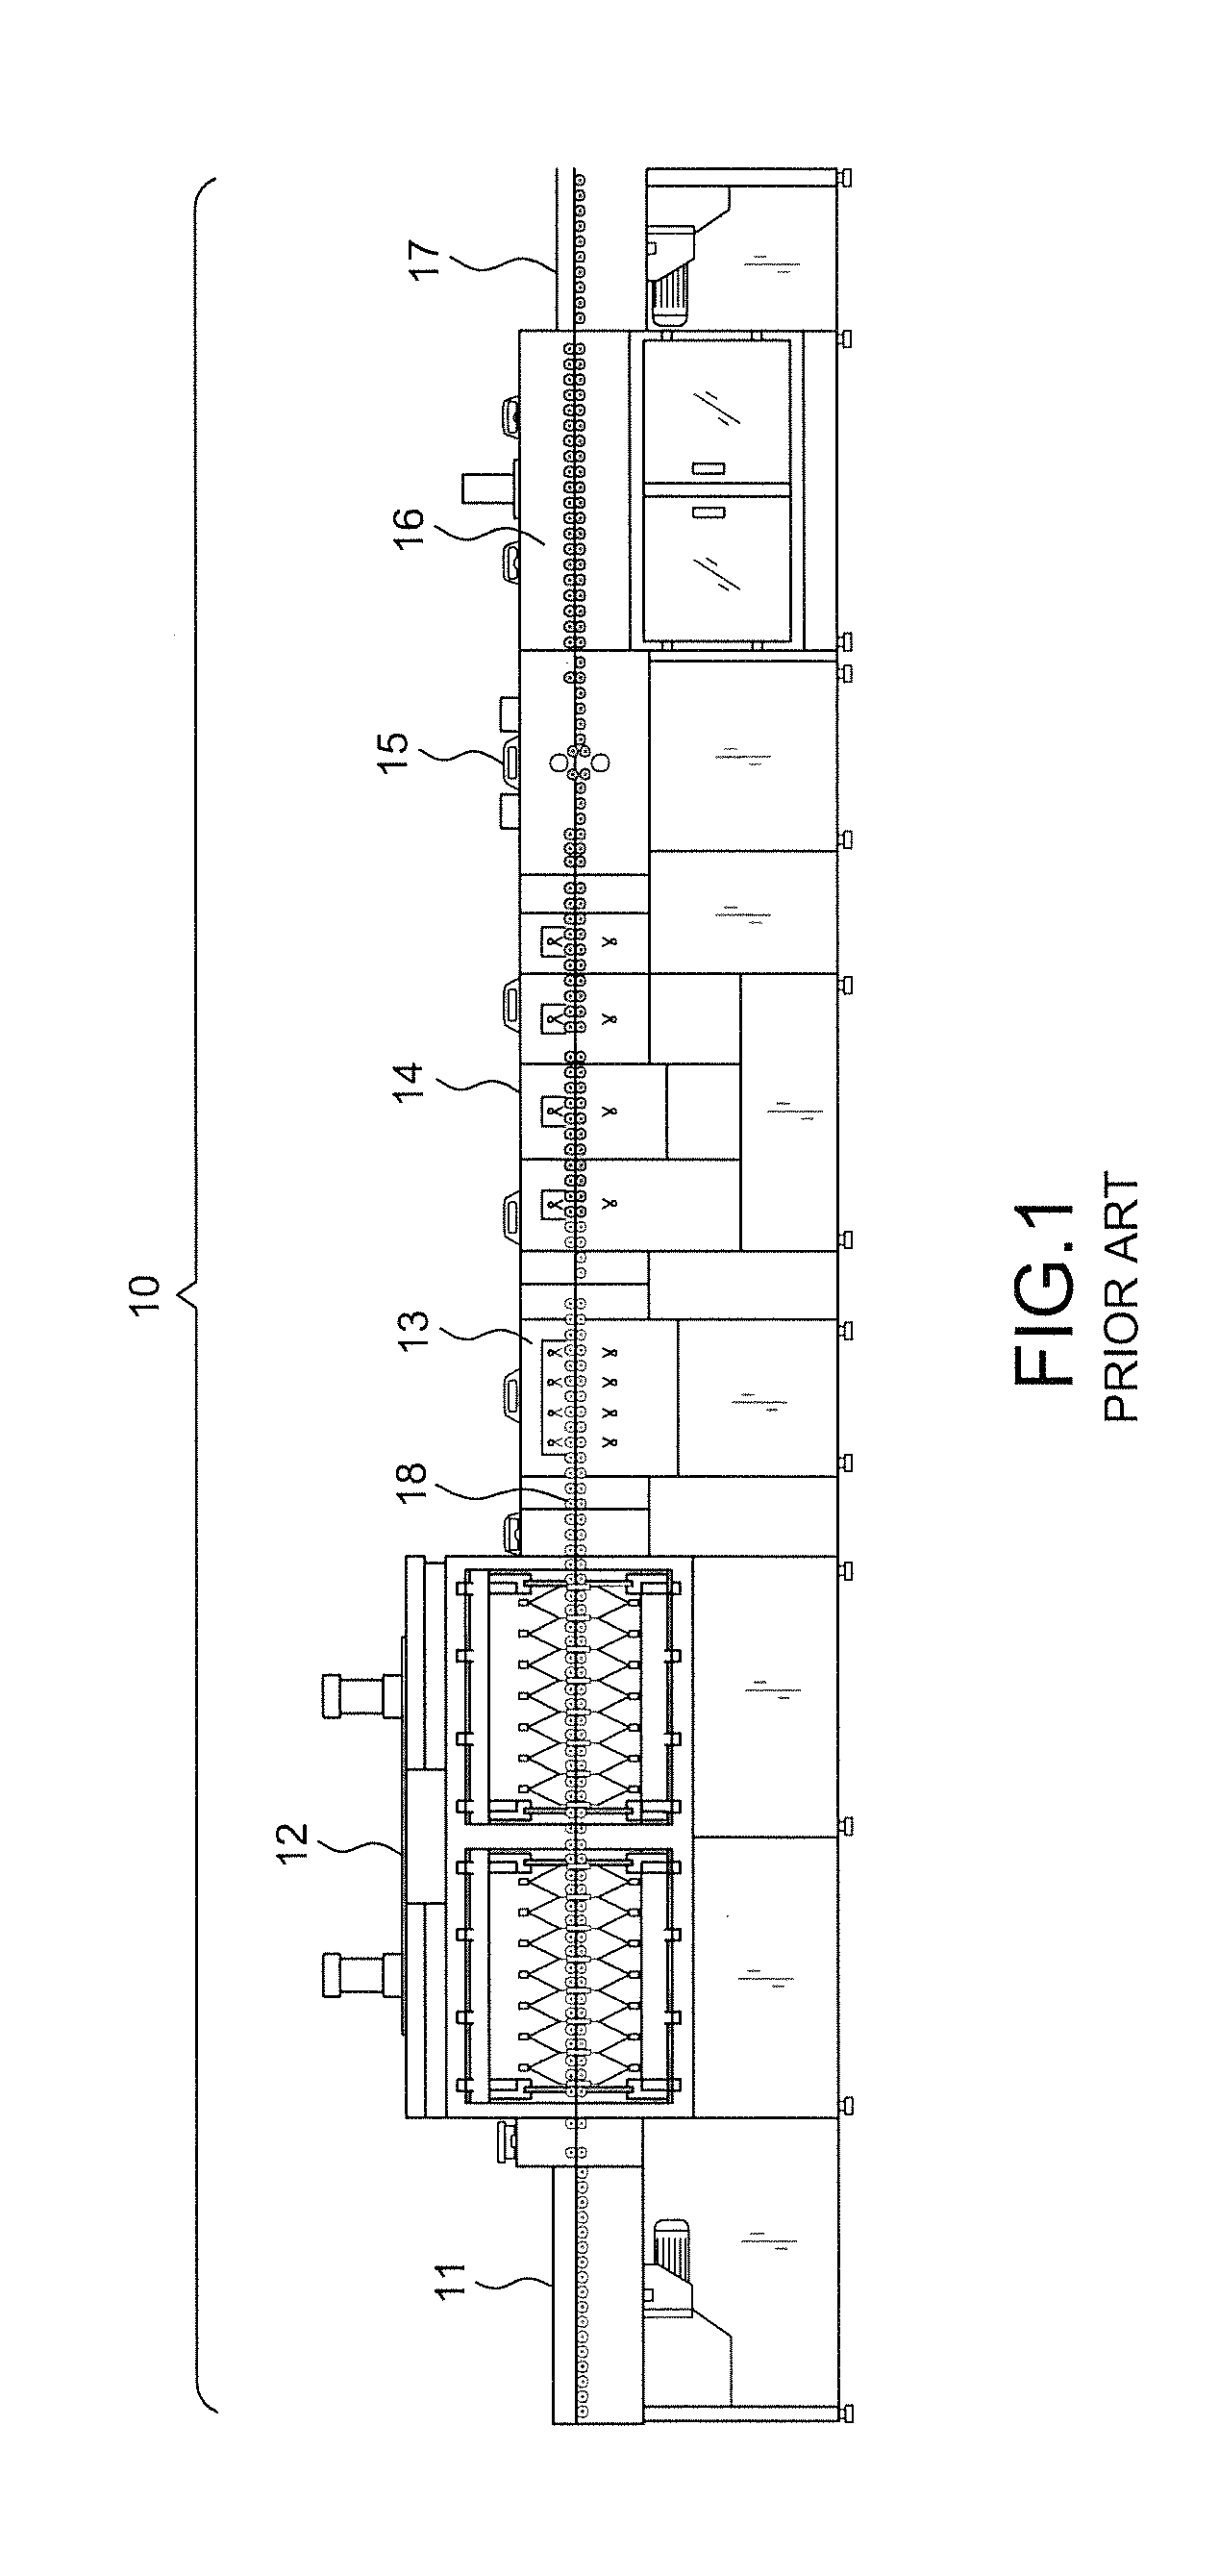 Method of thin printed circuit board wet process consistency on the same carrier